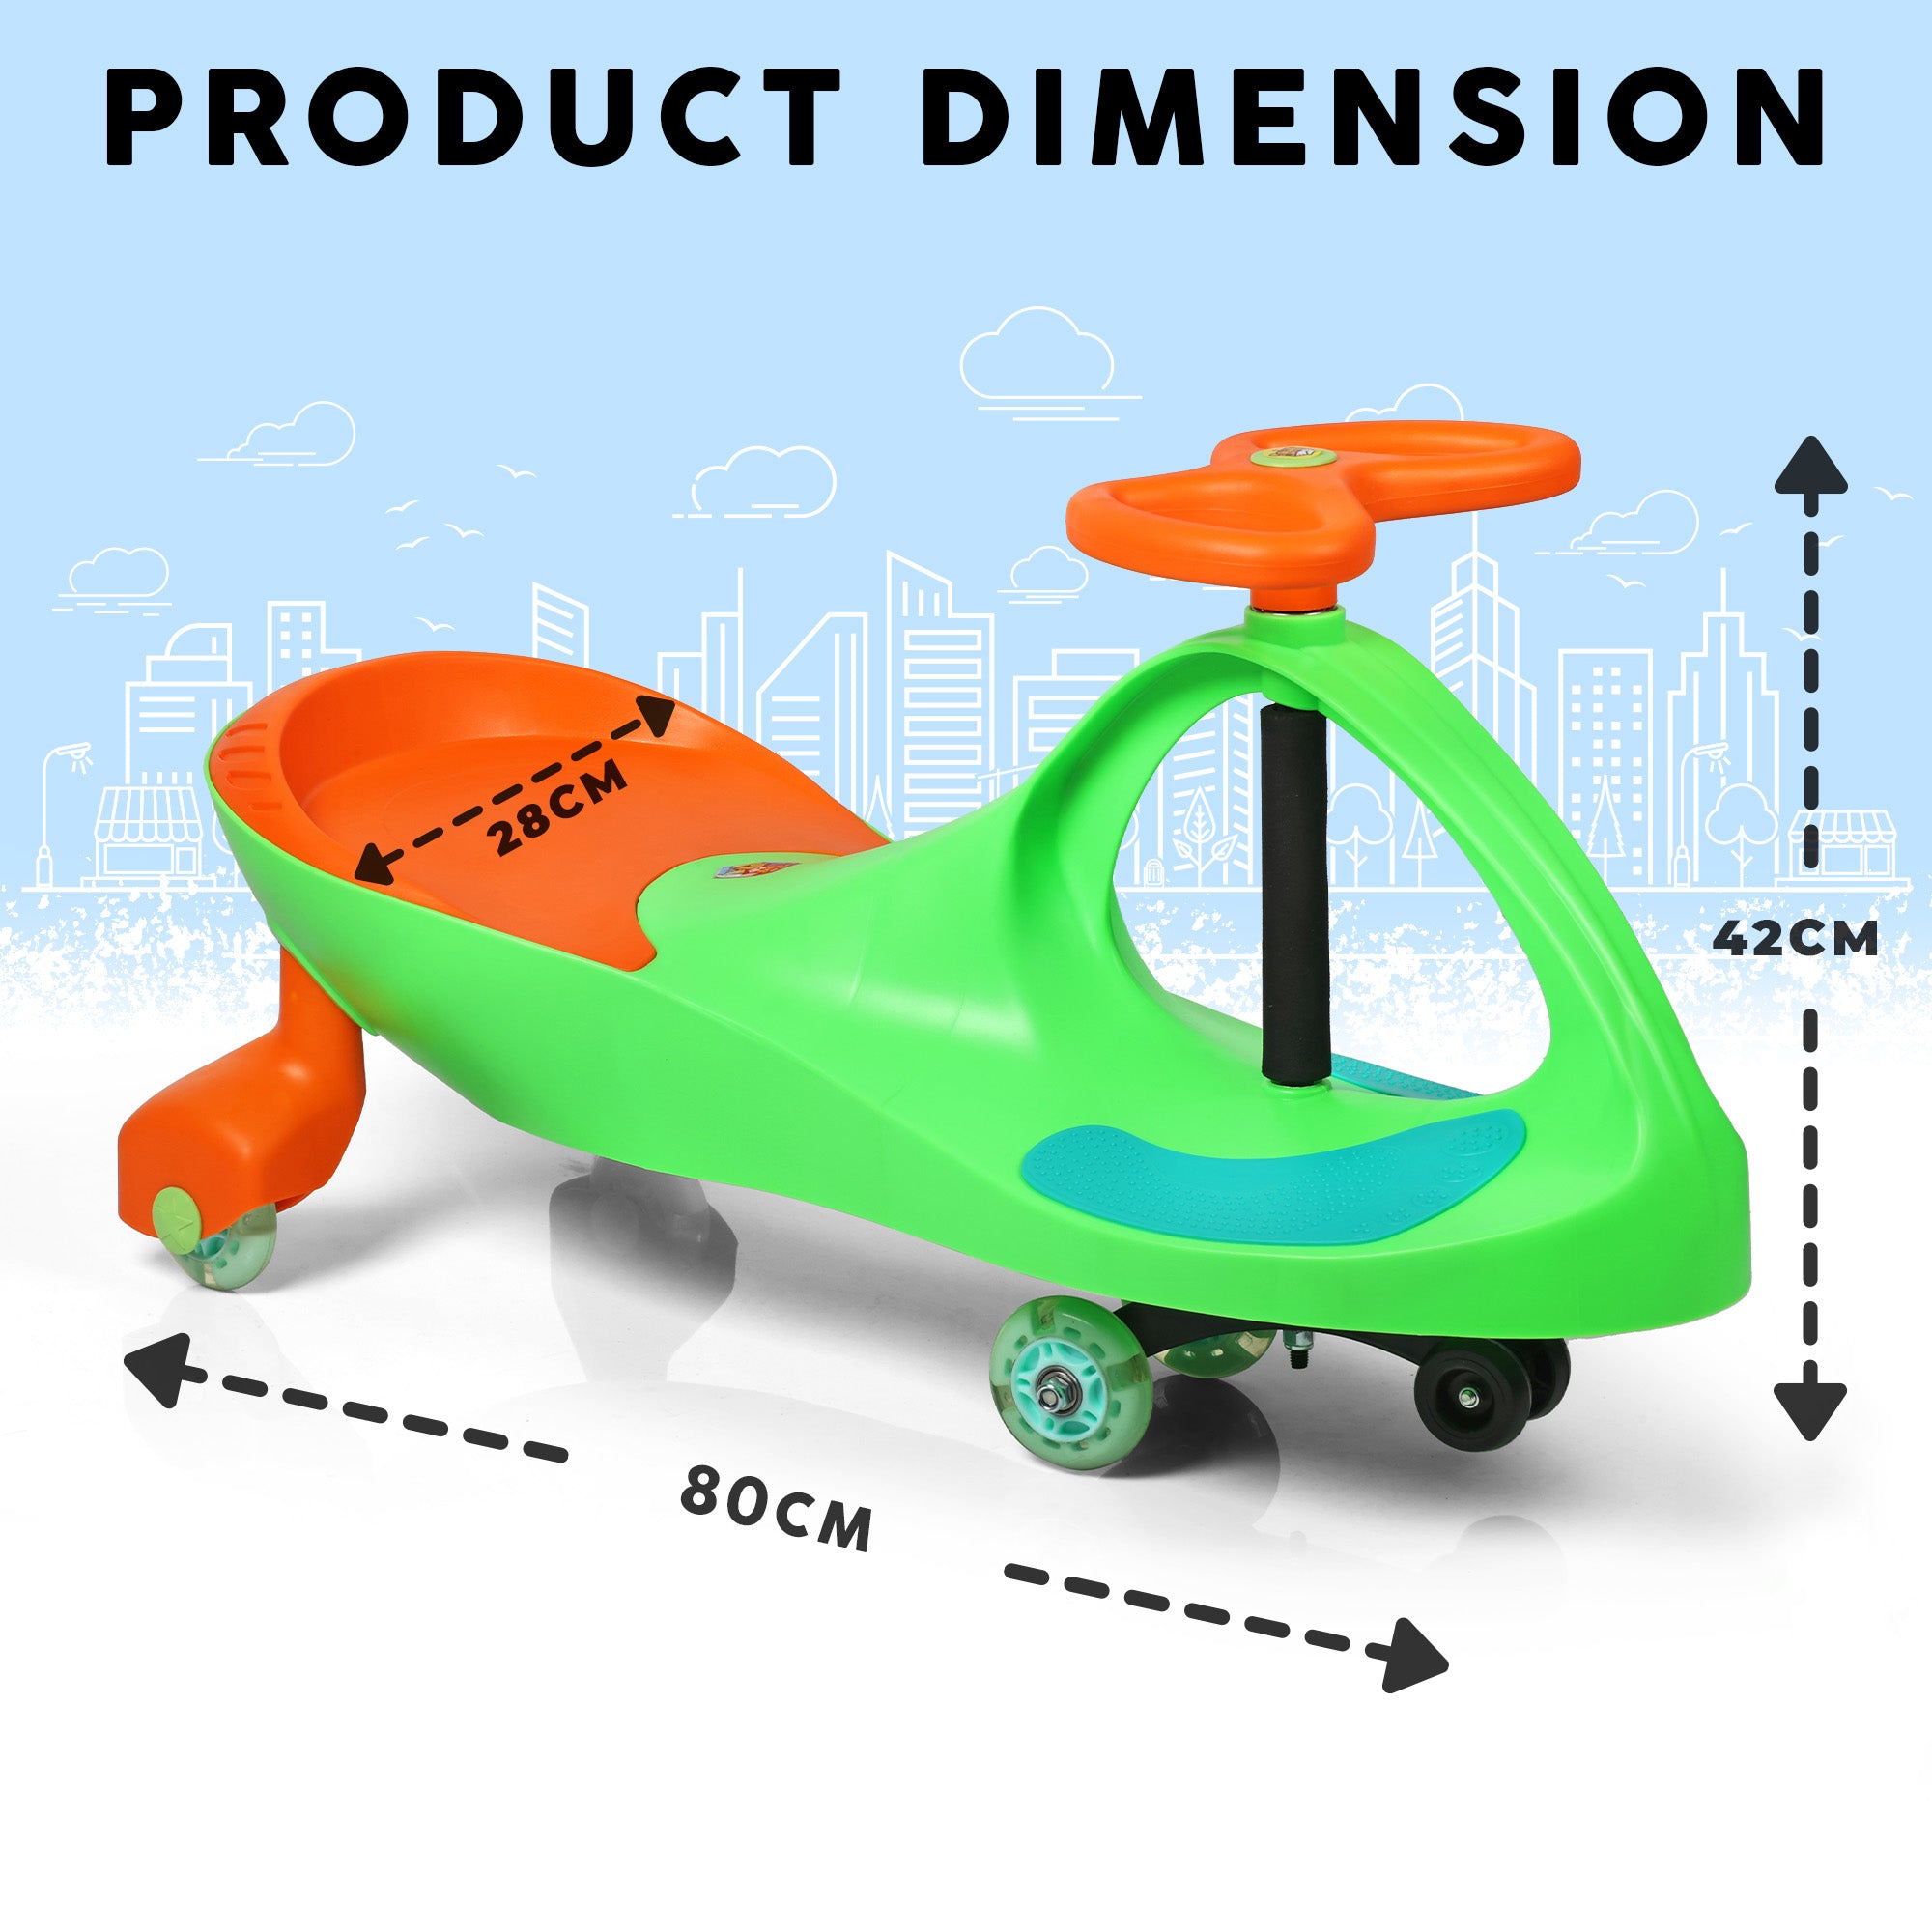 Tygatec Eco Ride-On Swing Car for Kids ( Orange Color)